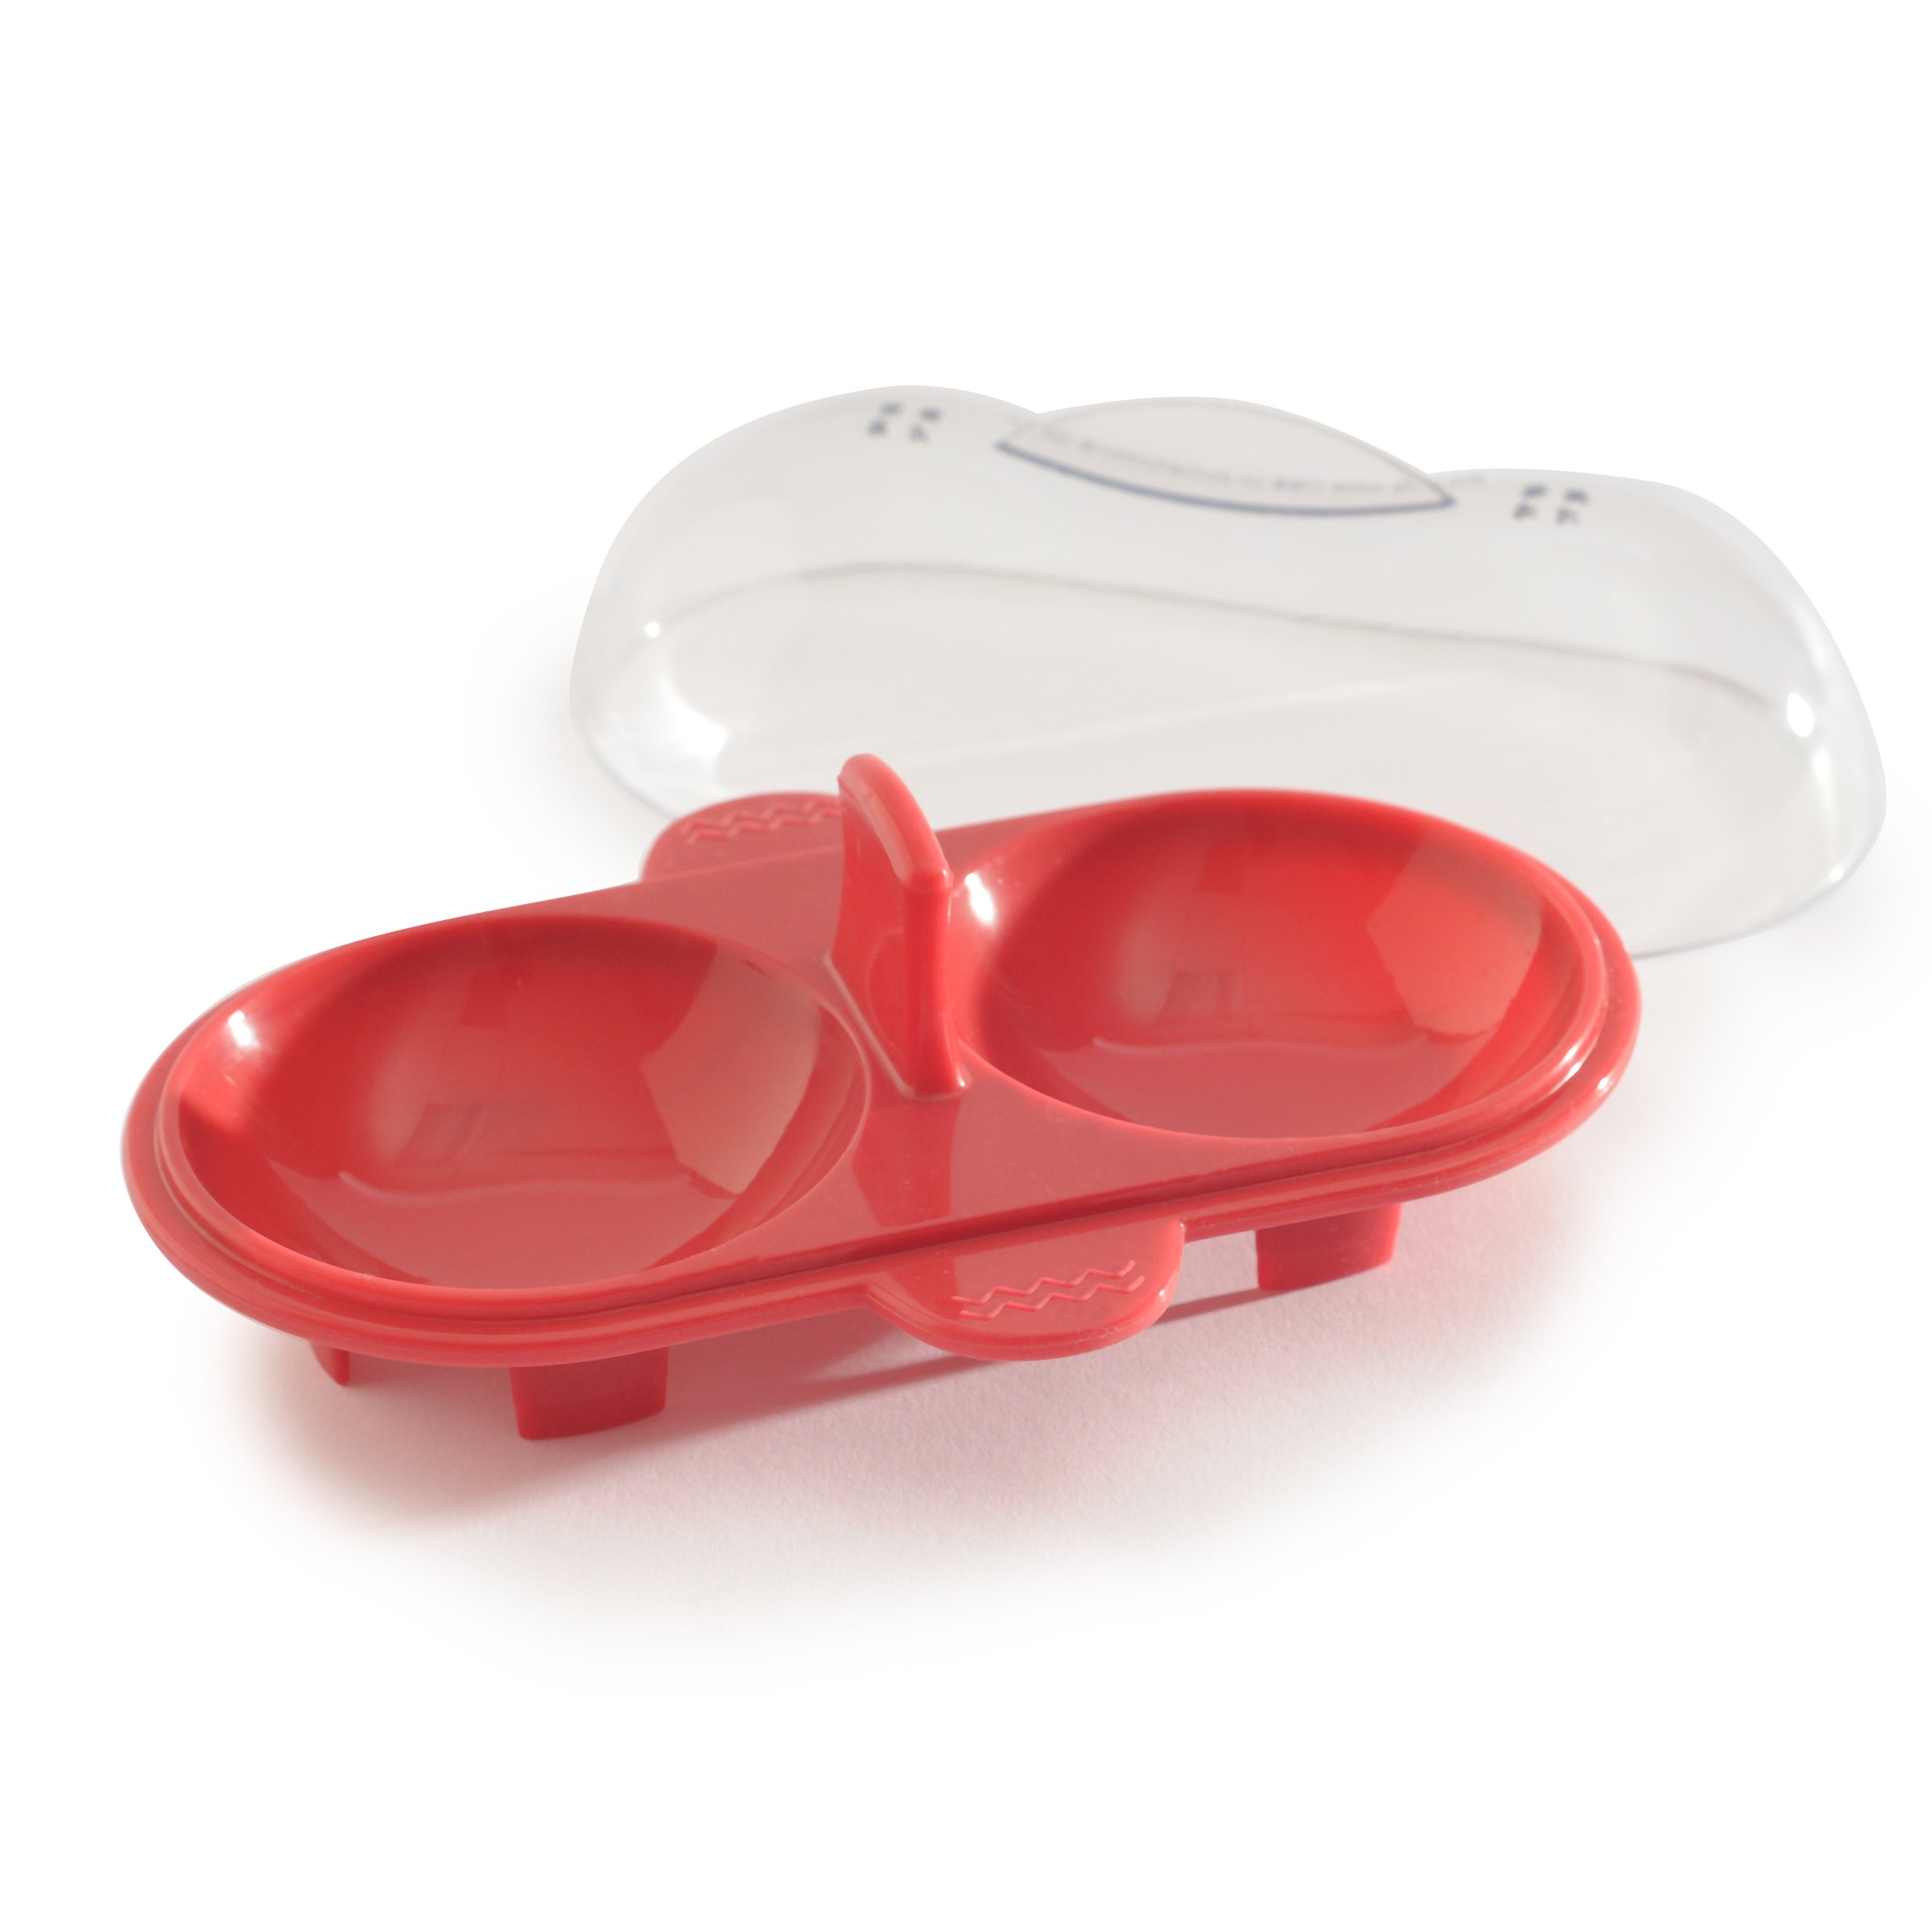 Norpro Silicone Microwave Double Egg Poacher, Red